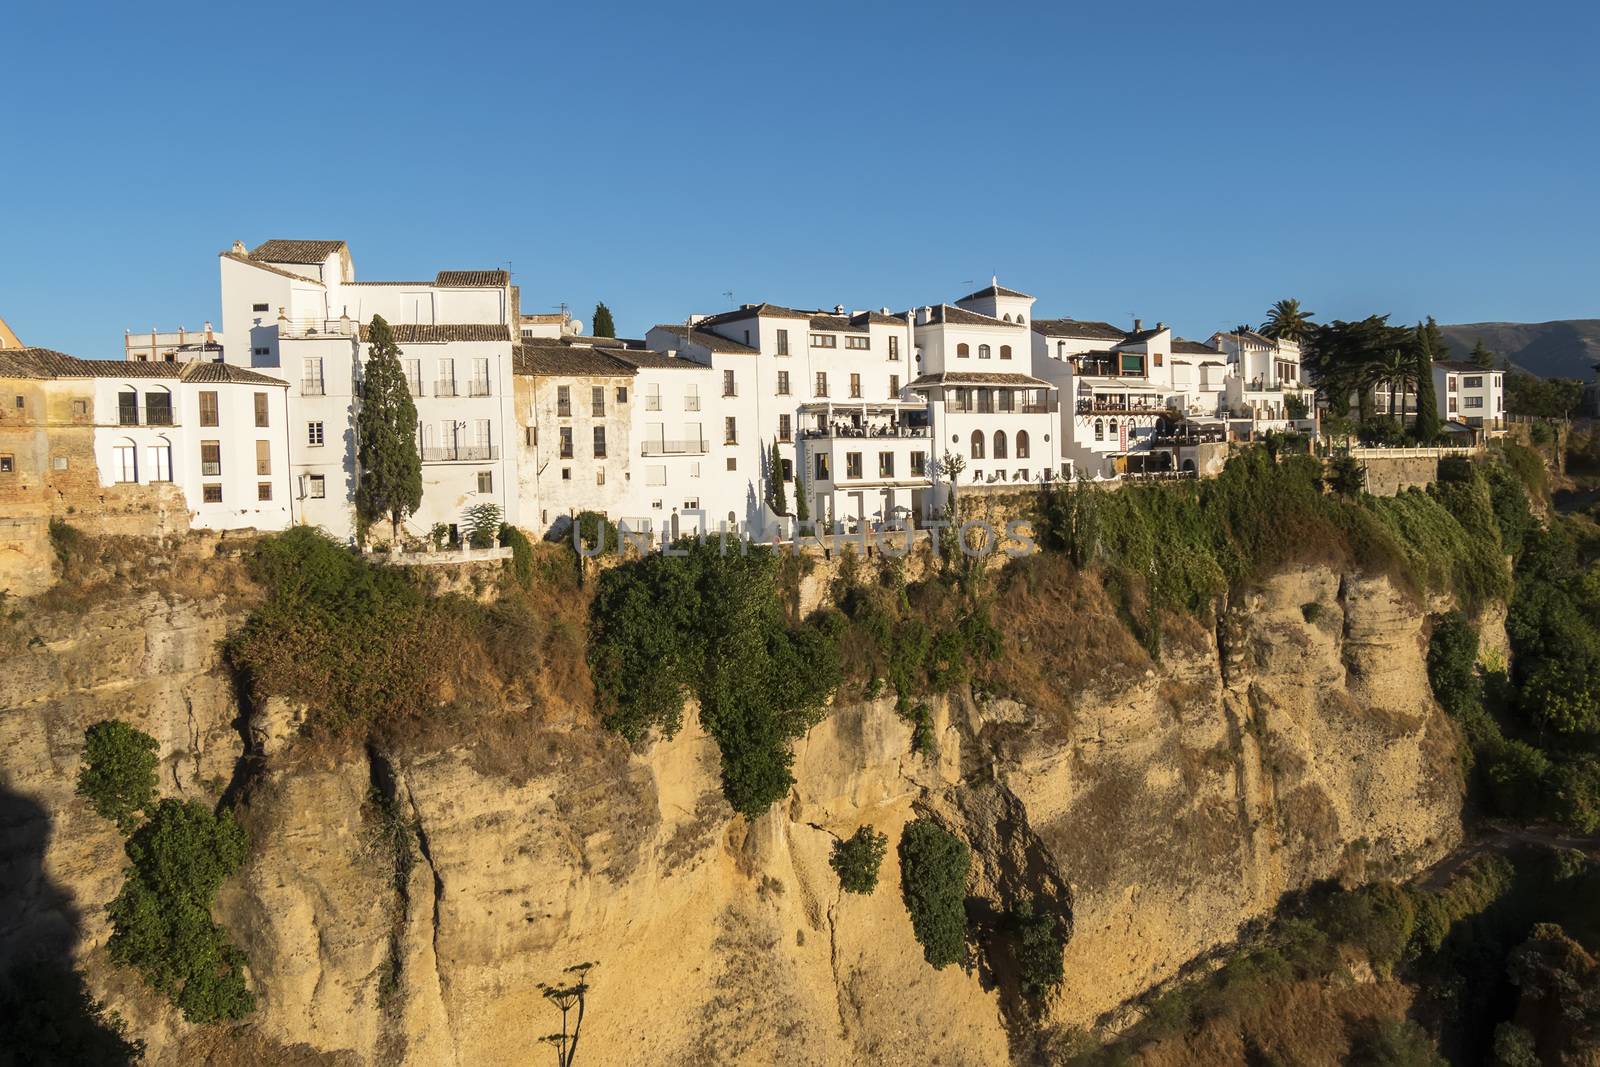 Partial view of the city of Ronda, monumental town, Malaga, Spai by max8xam